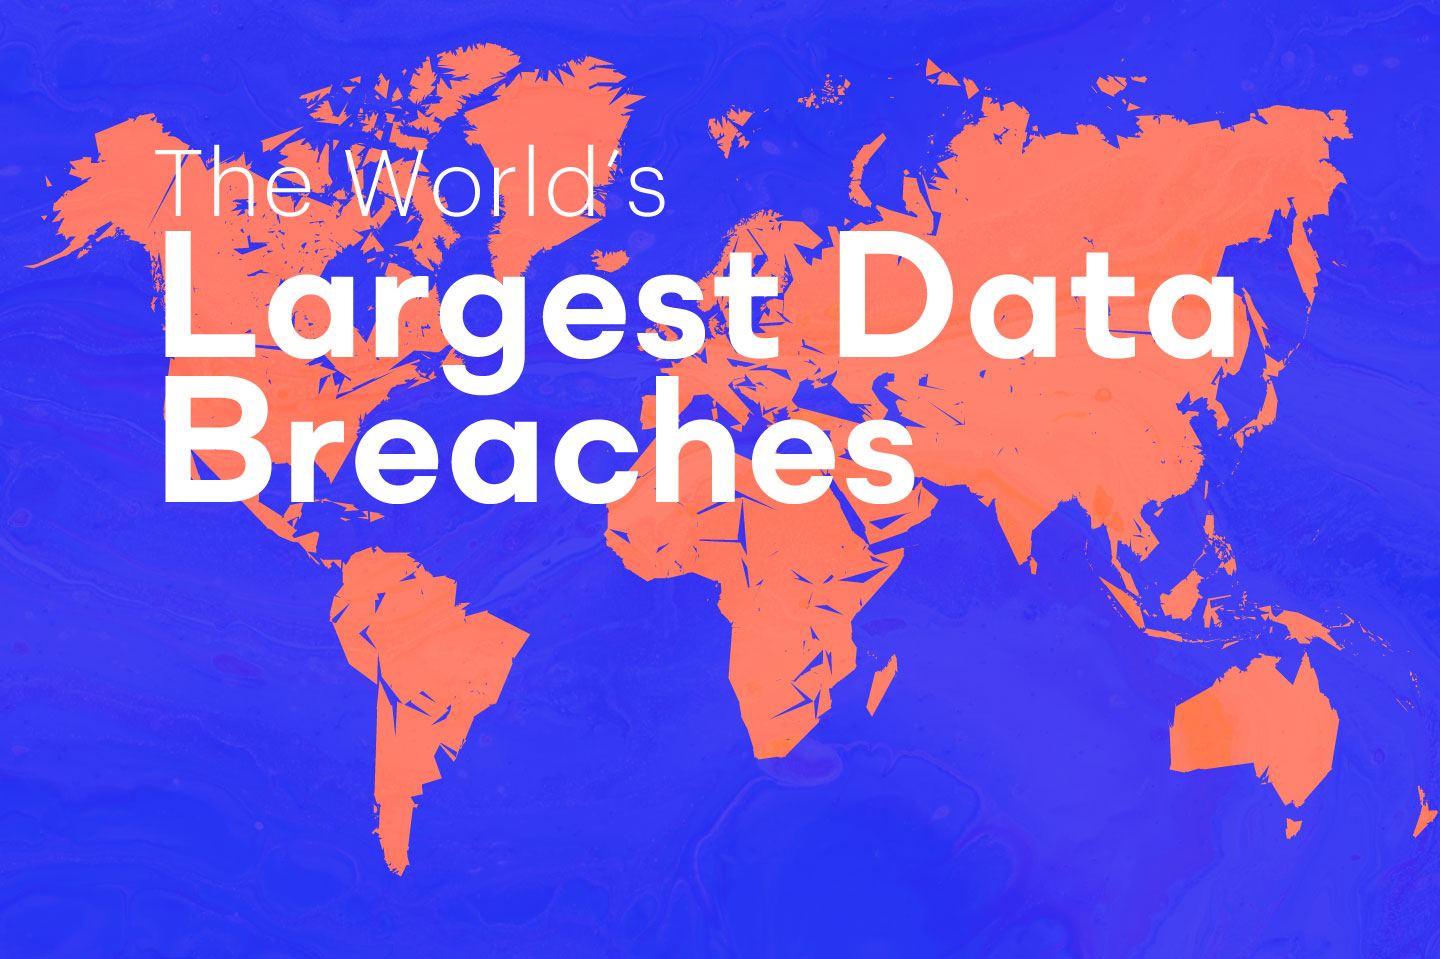 Illustration of a map of the world - with text "The World's Largest Data Breaches"